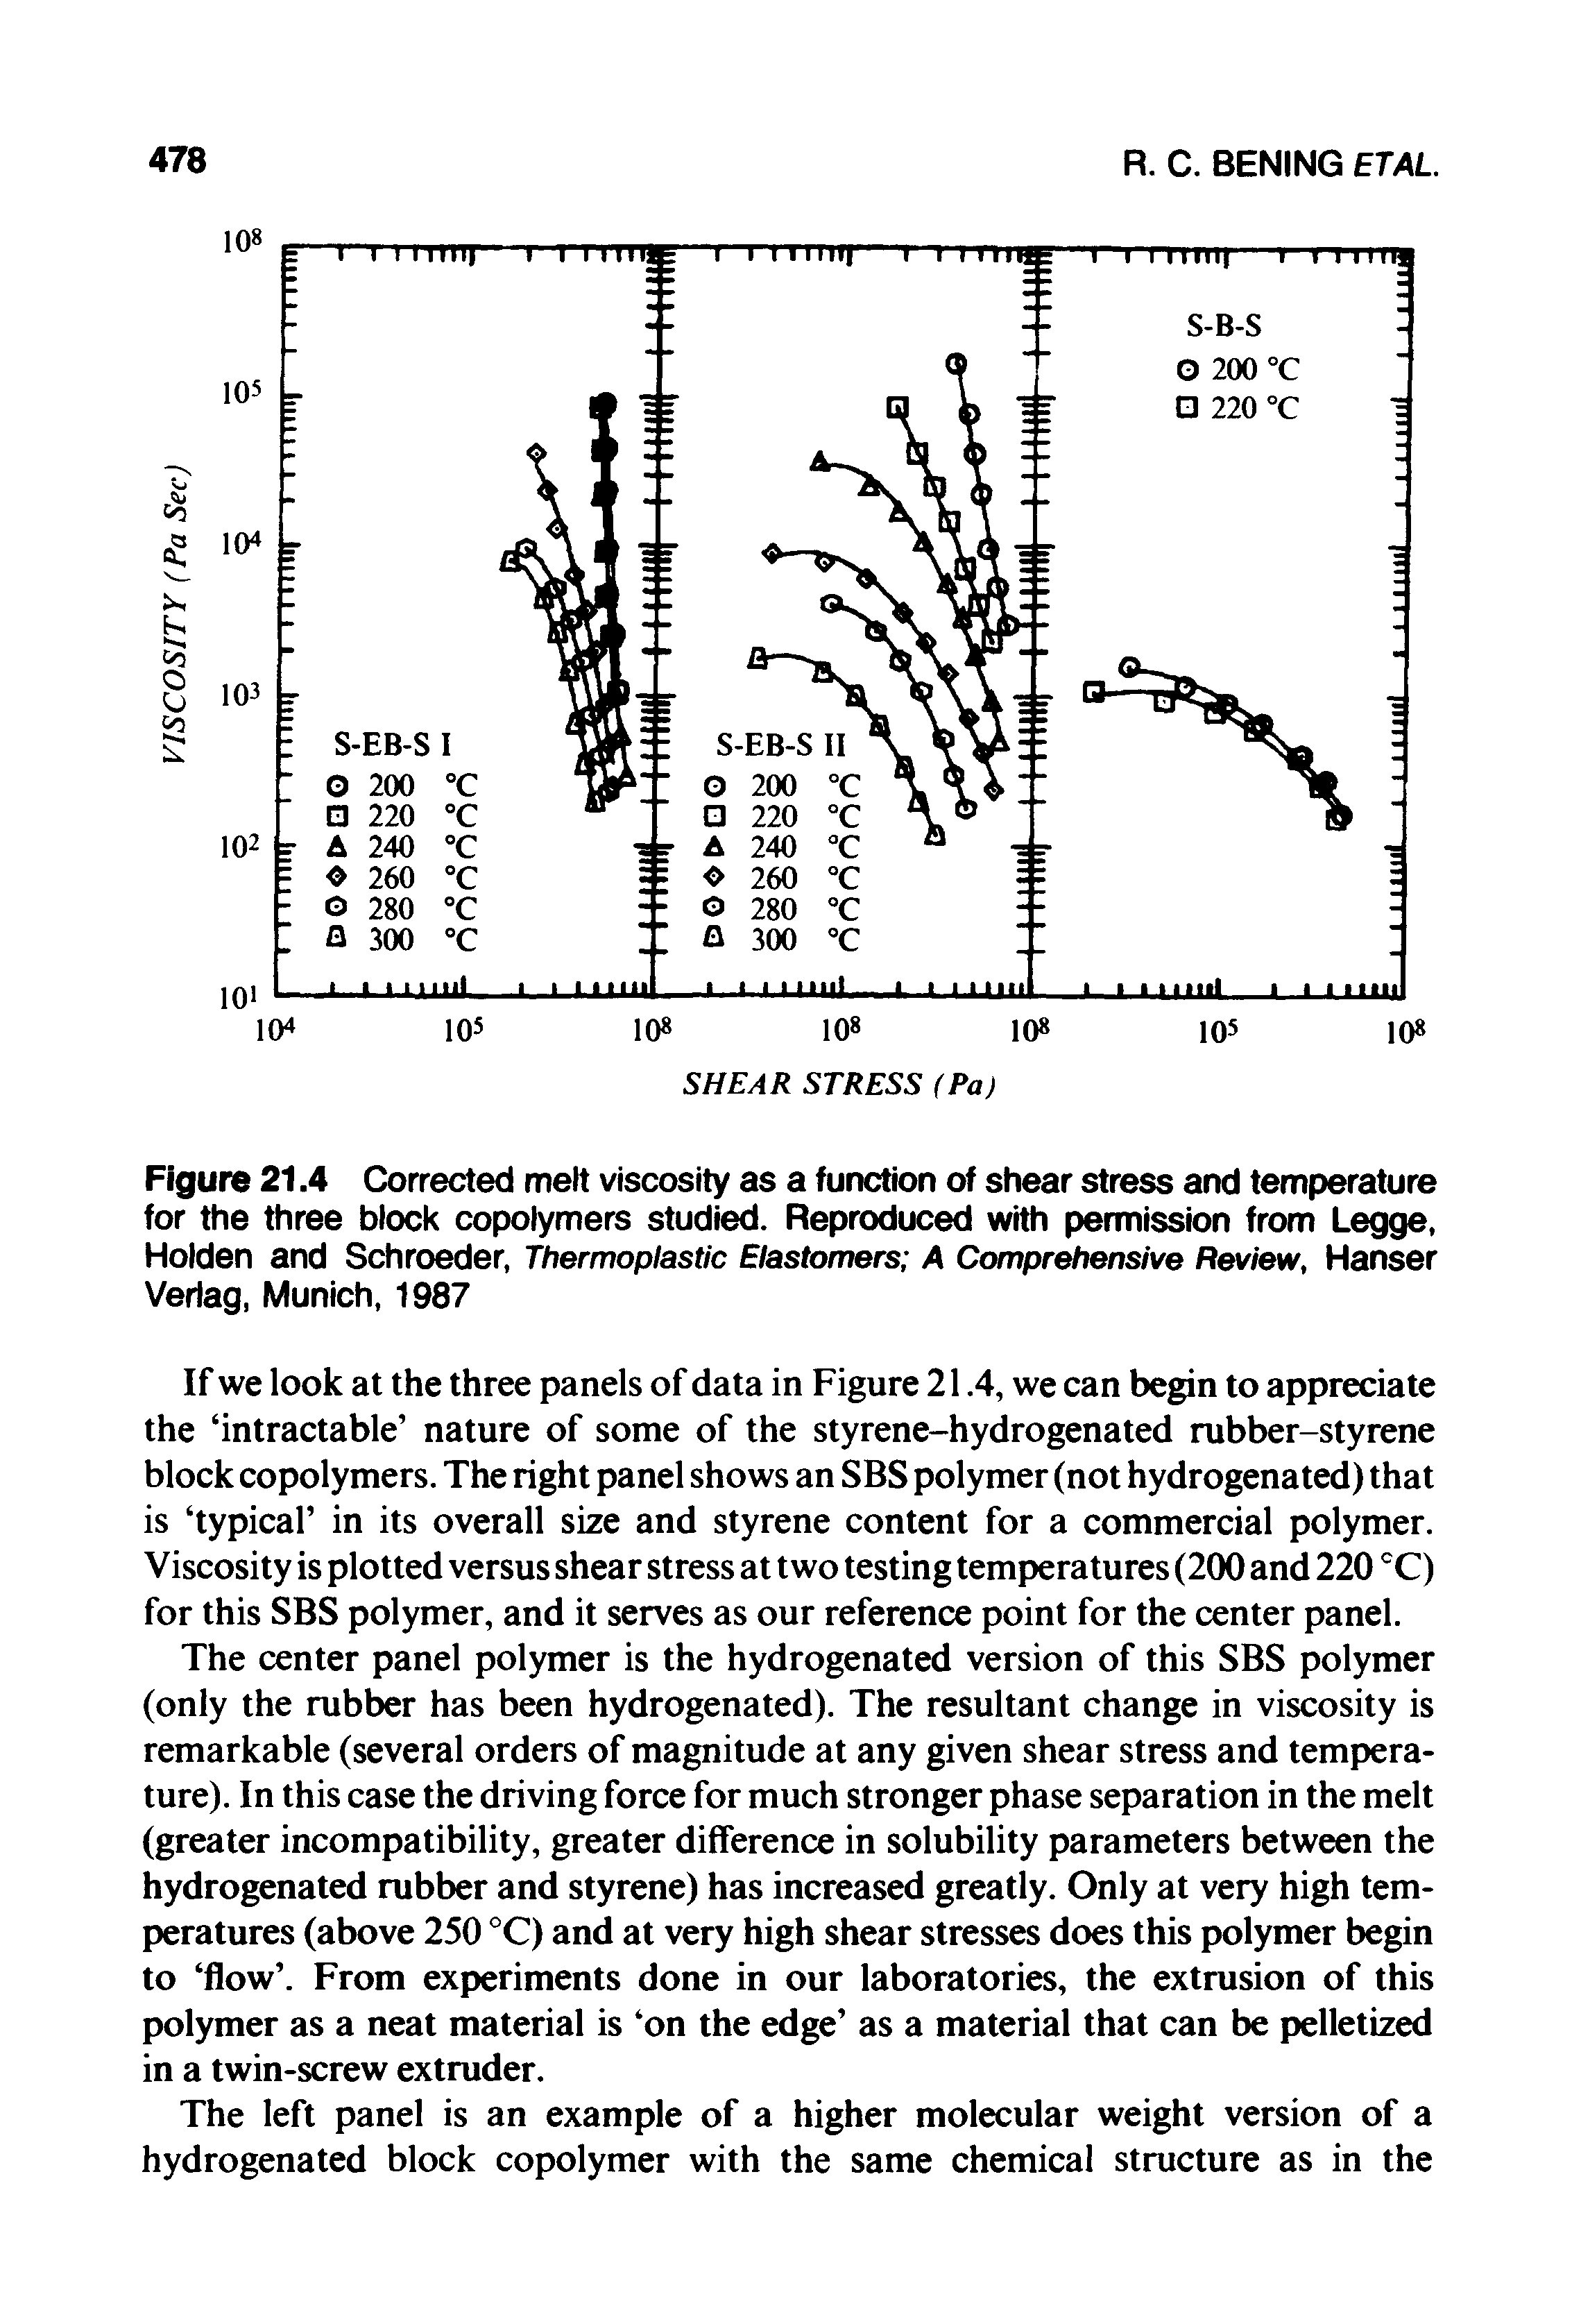 Figure 21.4 Corrected melt viscosity as a function of shear stress and temperature for the three block copolymers studied. Reproduced with permission from Legge, Holden and Schroeder, Thermoplastic Elastomers A Comprehensive Review, Hanser Verlag, Munich, 1987...